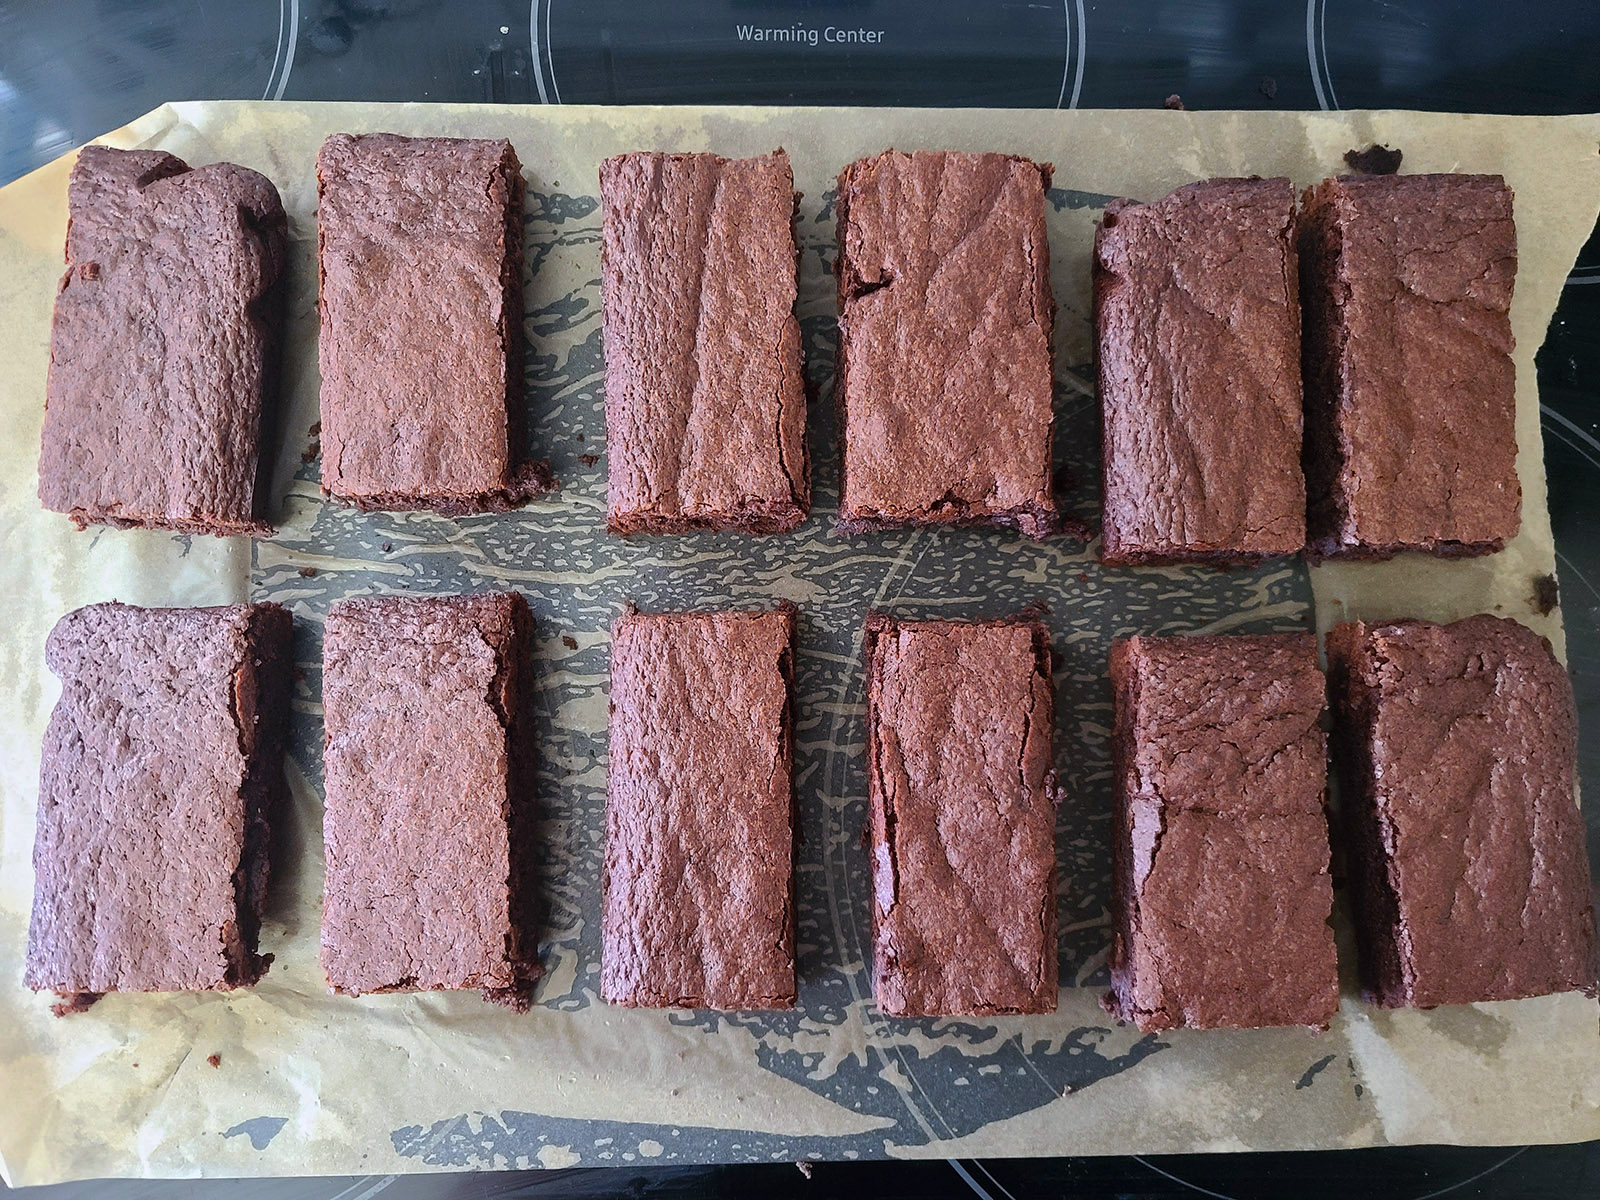 12 rectangular brownie bars lined up on a piece of parchment paper.